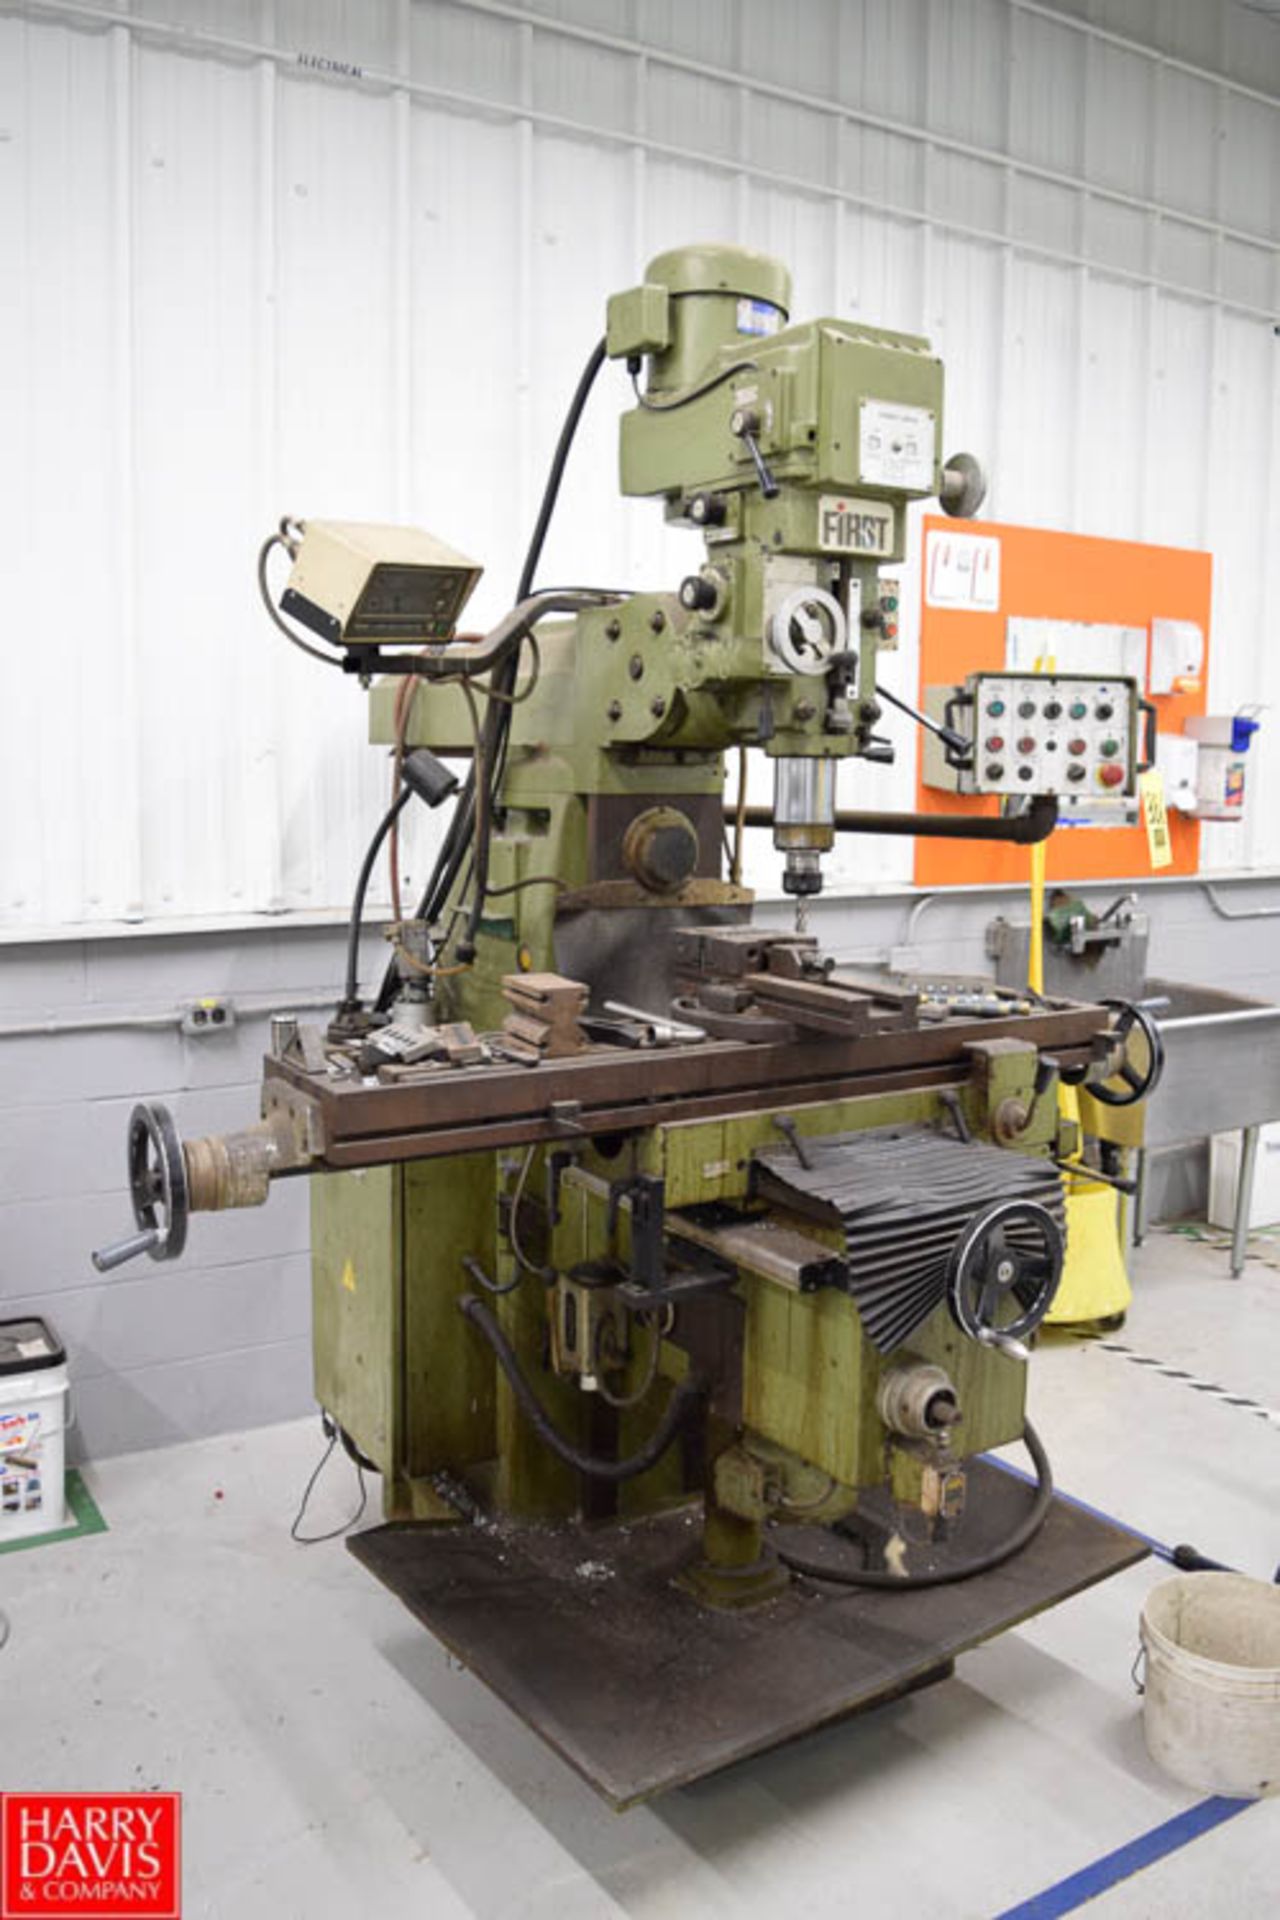 First Vertical Milling Machine with Digital Read Outs and Vise - Rigging Fee $ 395